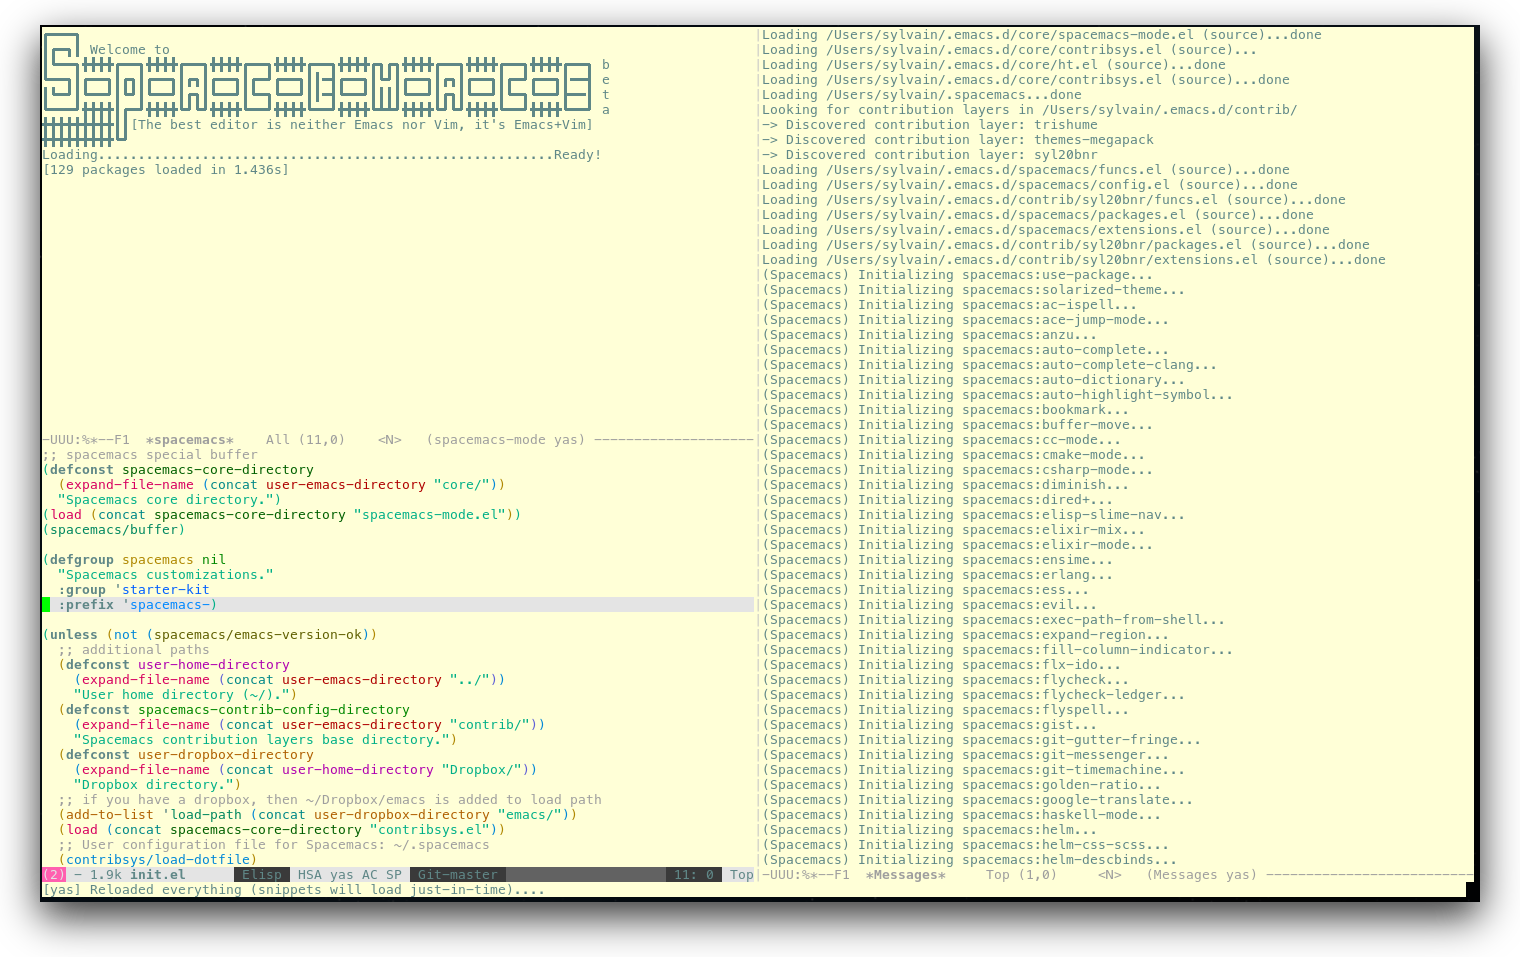 /TakeV/spacemacs/media/commit/7eeccc222d475e5148894ce33eefded5172c3324/doc/img/spacemacs-urxvt.png